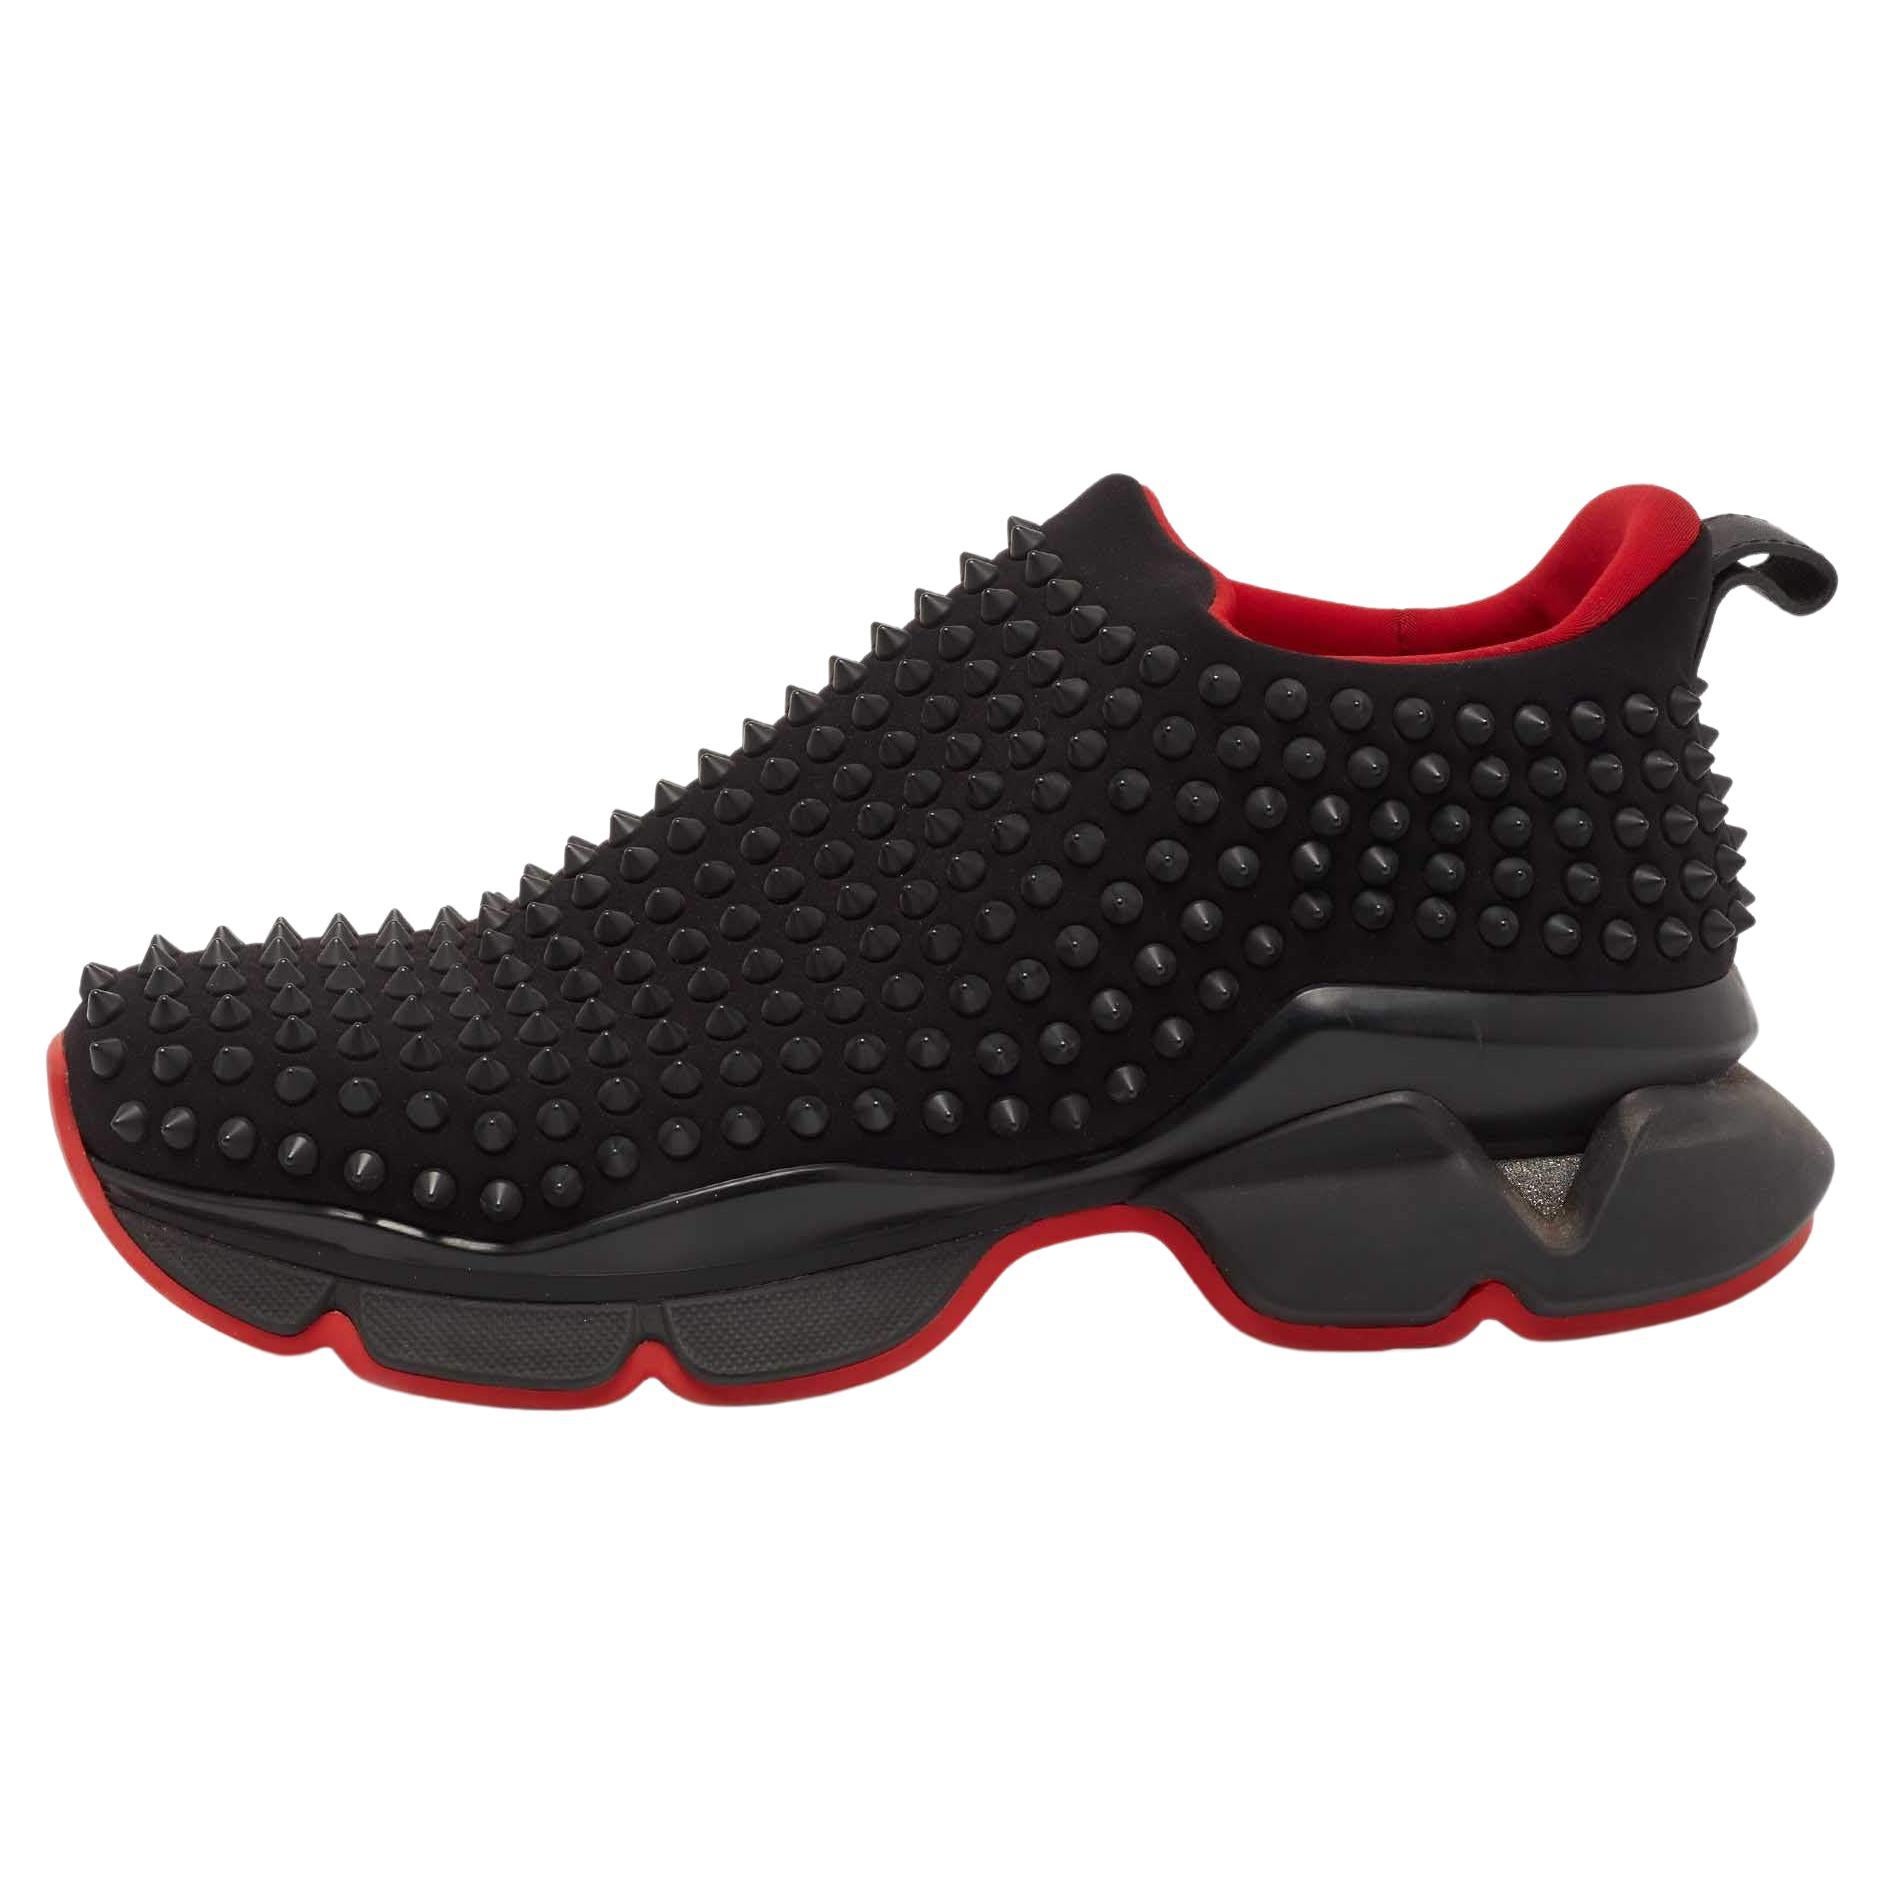 Christian Louboutin Black Stretch Fabric Spike Sock Slip On Sneakers Size 40.5 For Sale